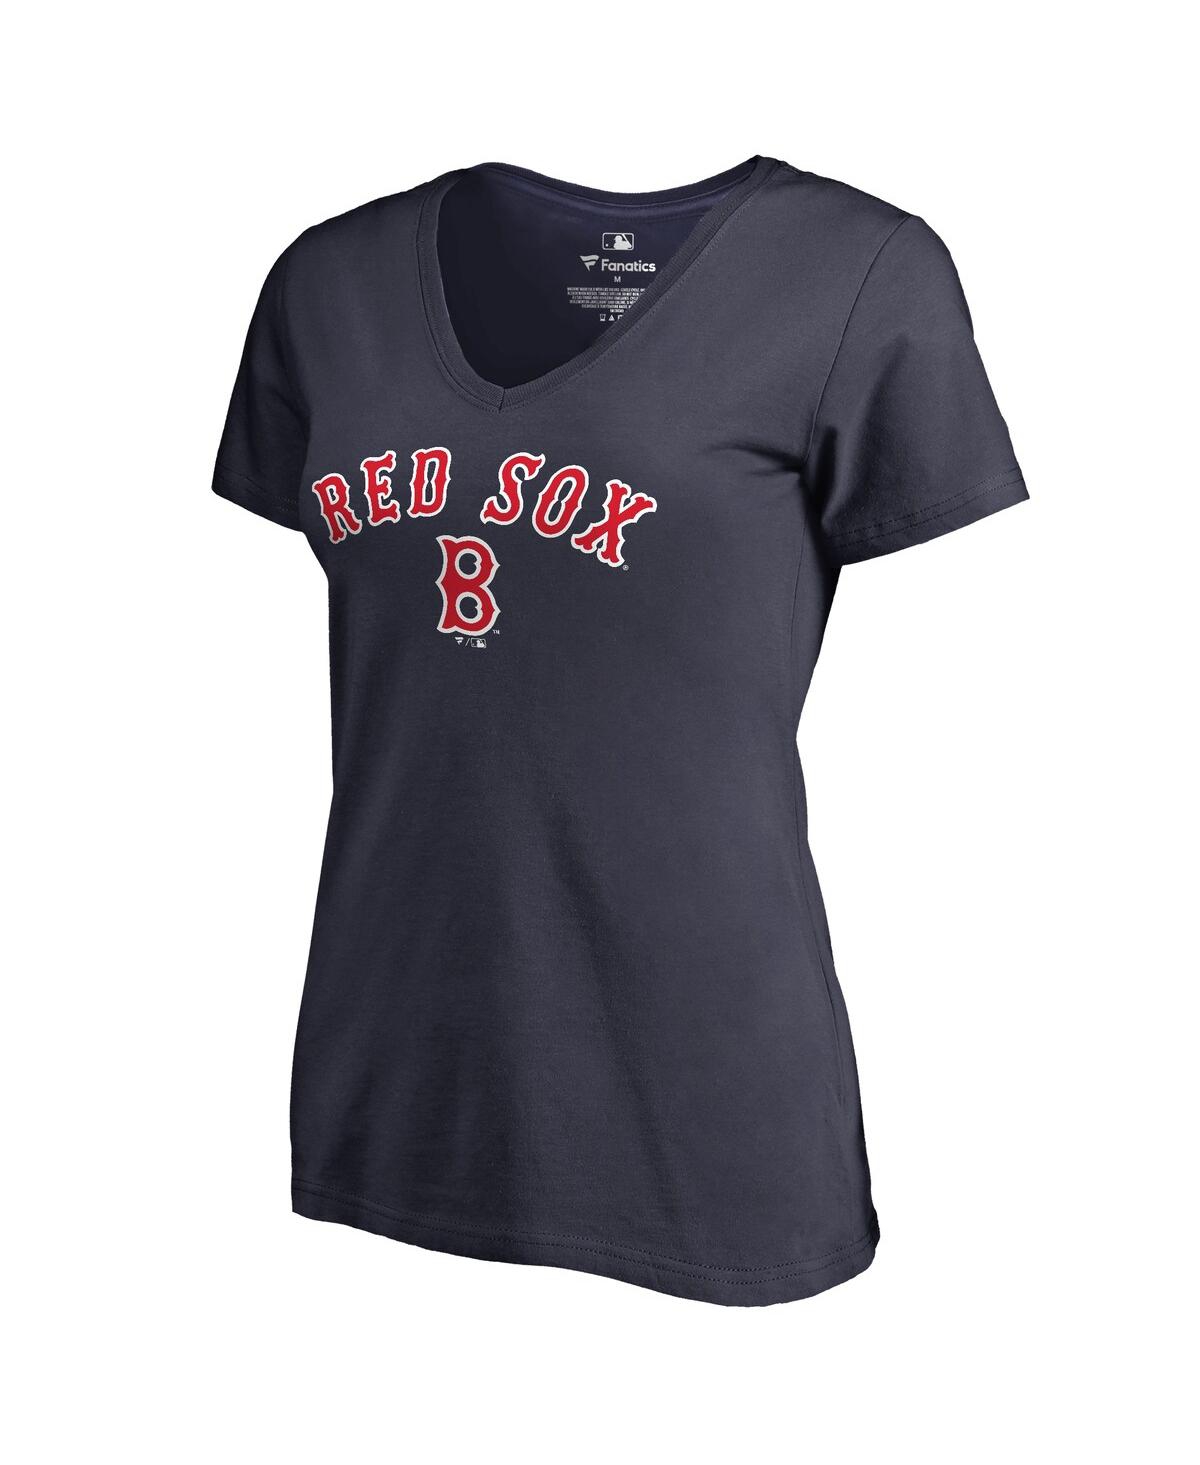 Women's Fanatics Navy Boston Red Sox Cooperstown Collection Wahconah T-shirt - Navy